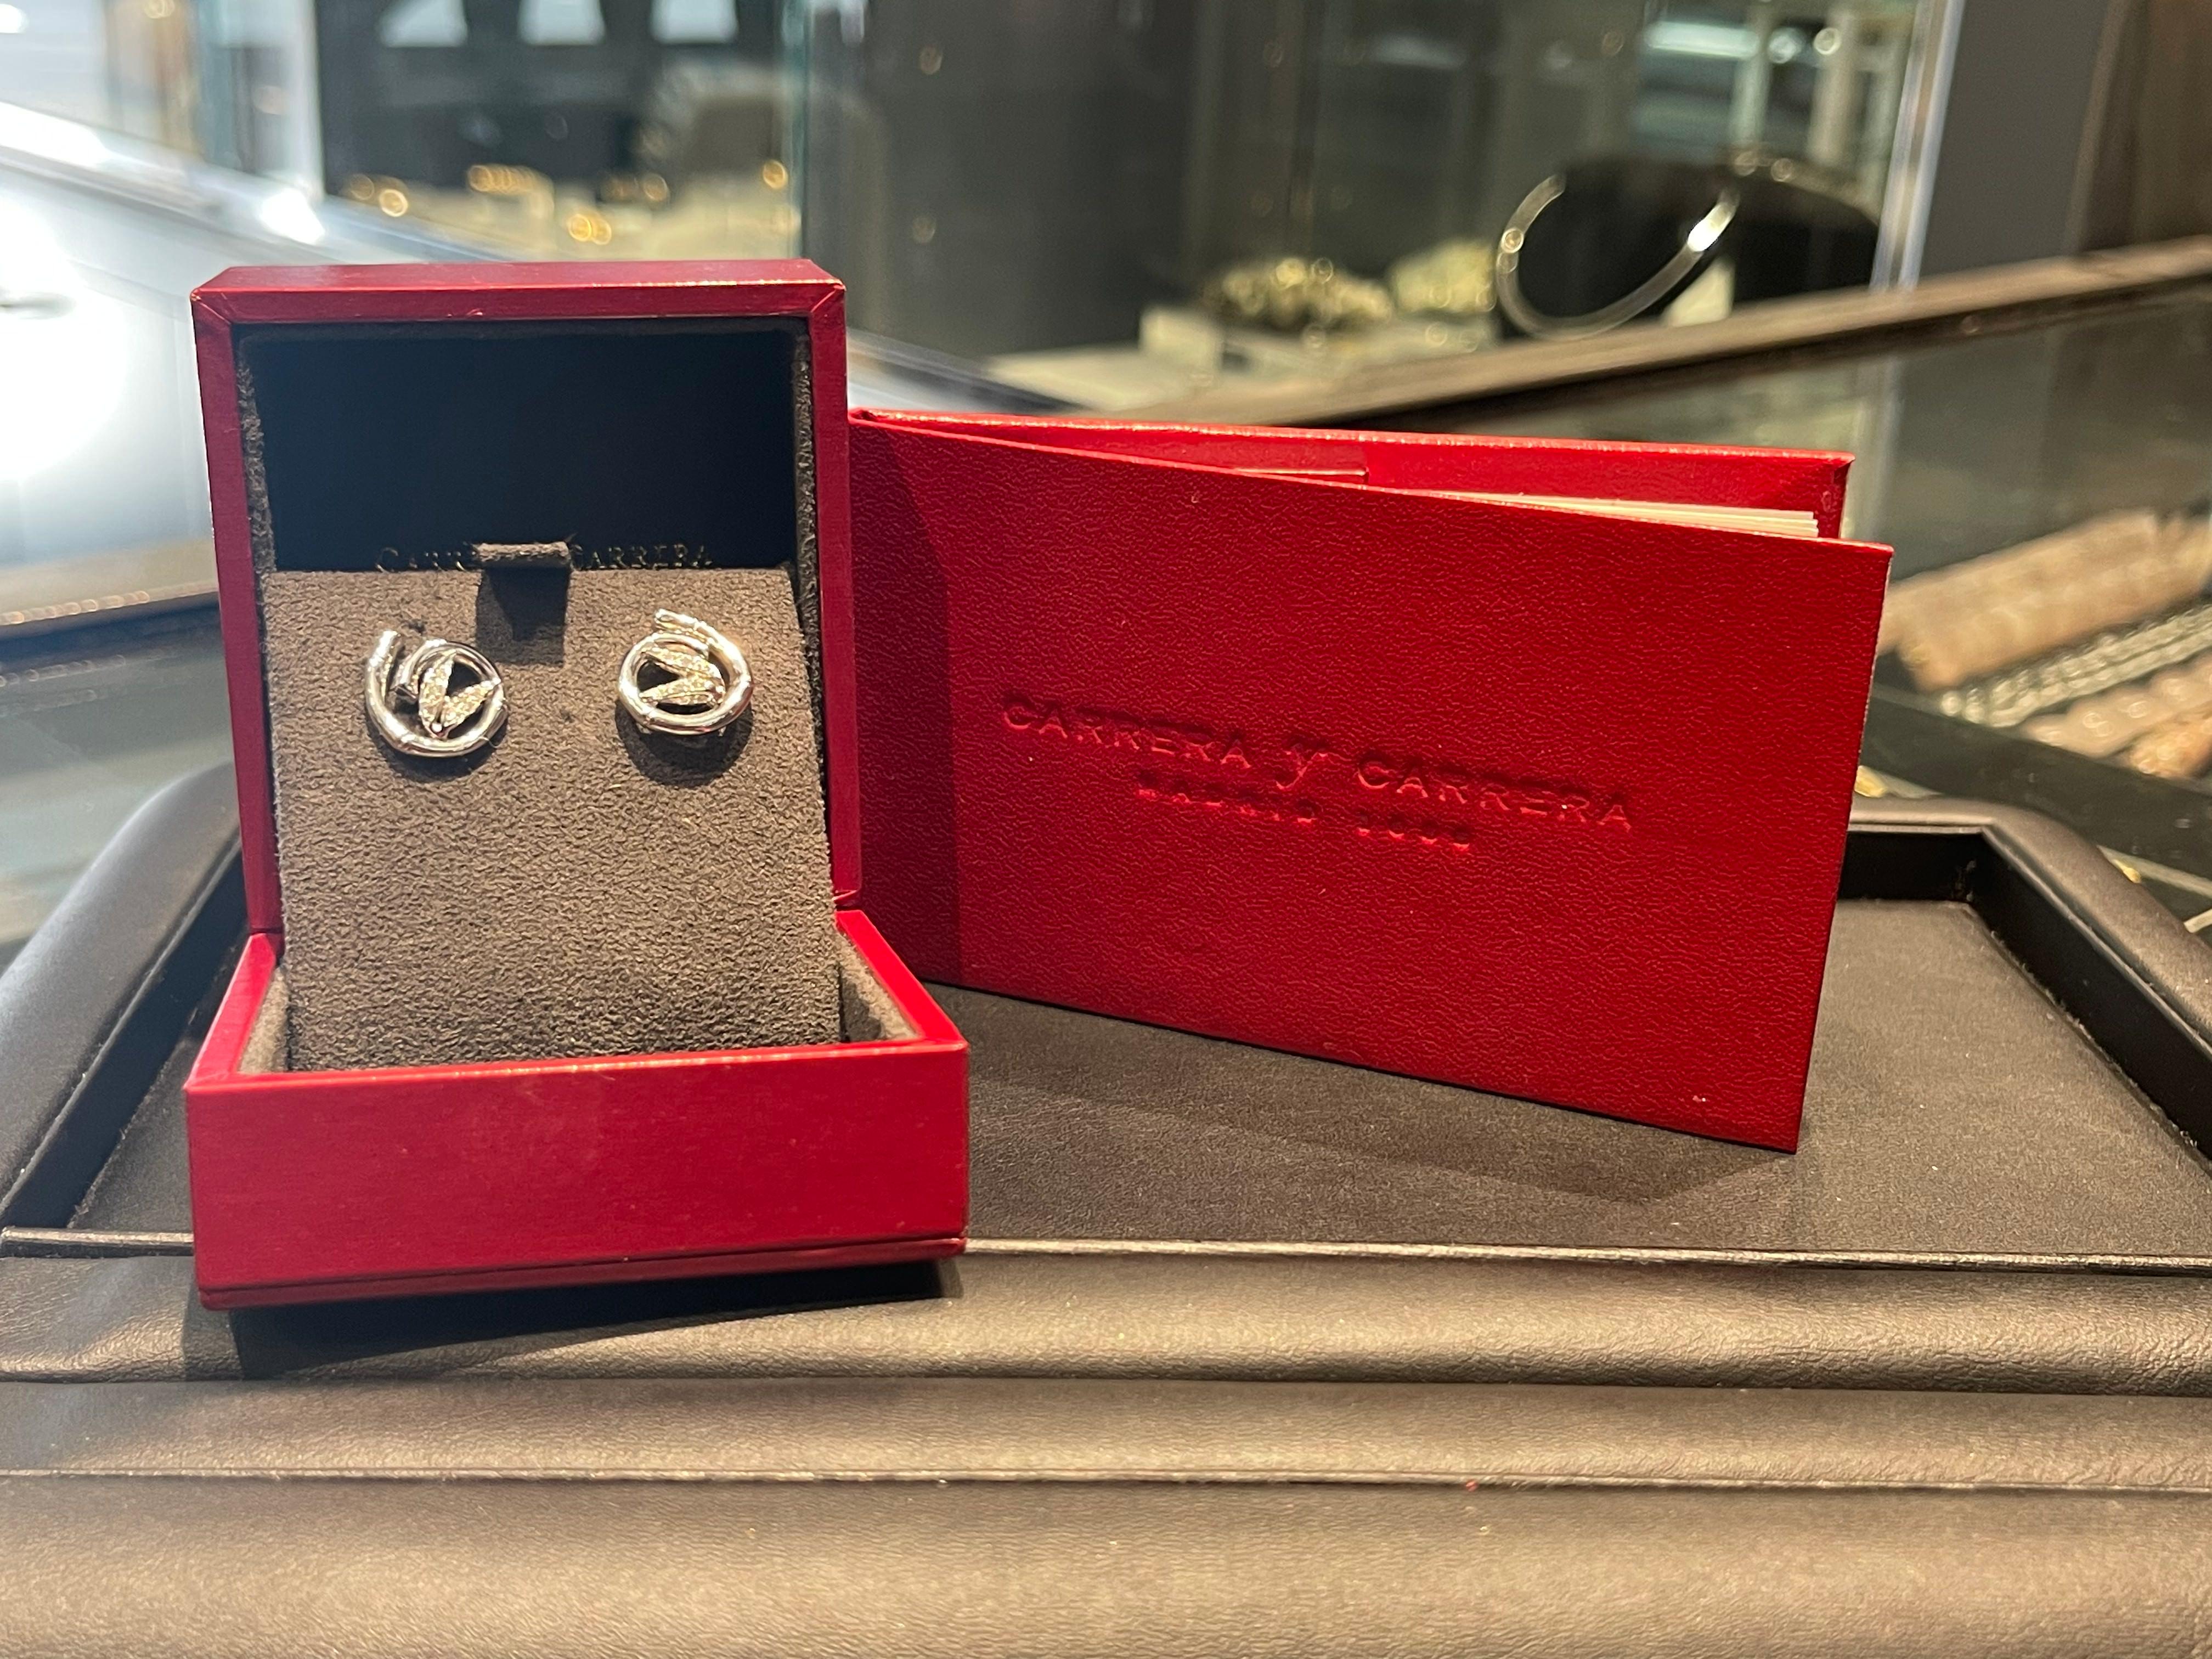 New pair of Carrera y Carrera 18K white gold diamond cufflinks. The shape of cufflinks represents bamboo stems and leaves paved with diamonds.

Total weight: 11 grams

Comes with an original box and papers.

All our pieces have been carefully